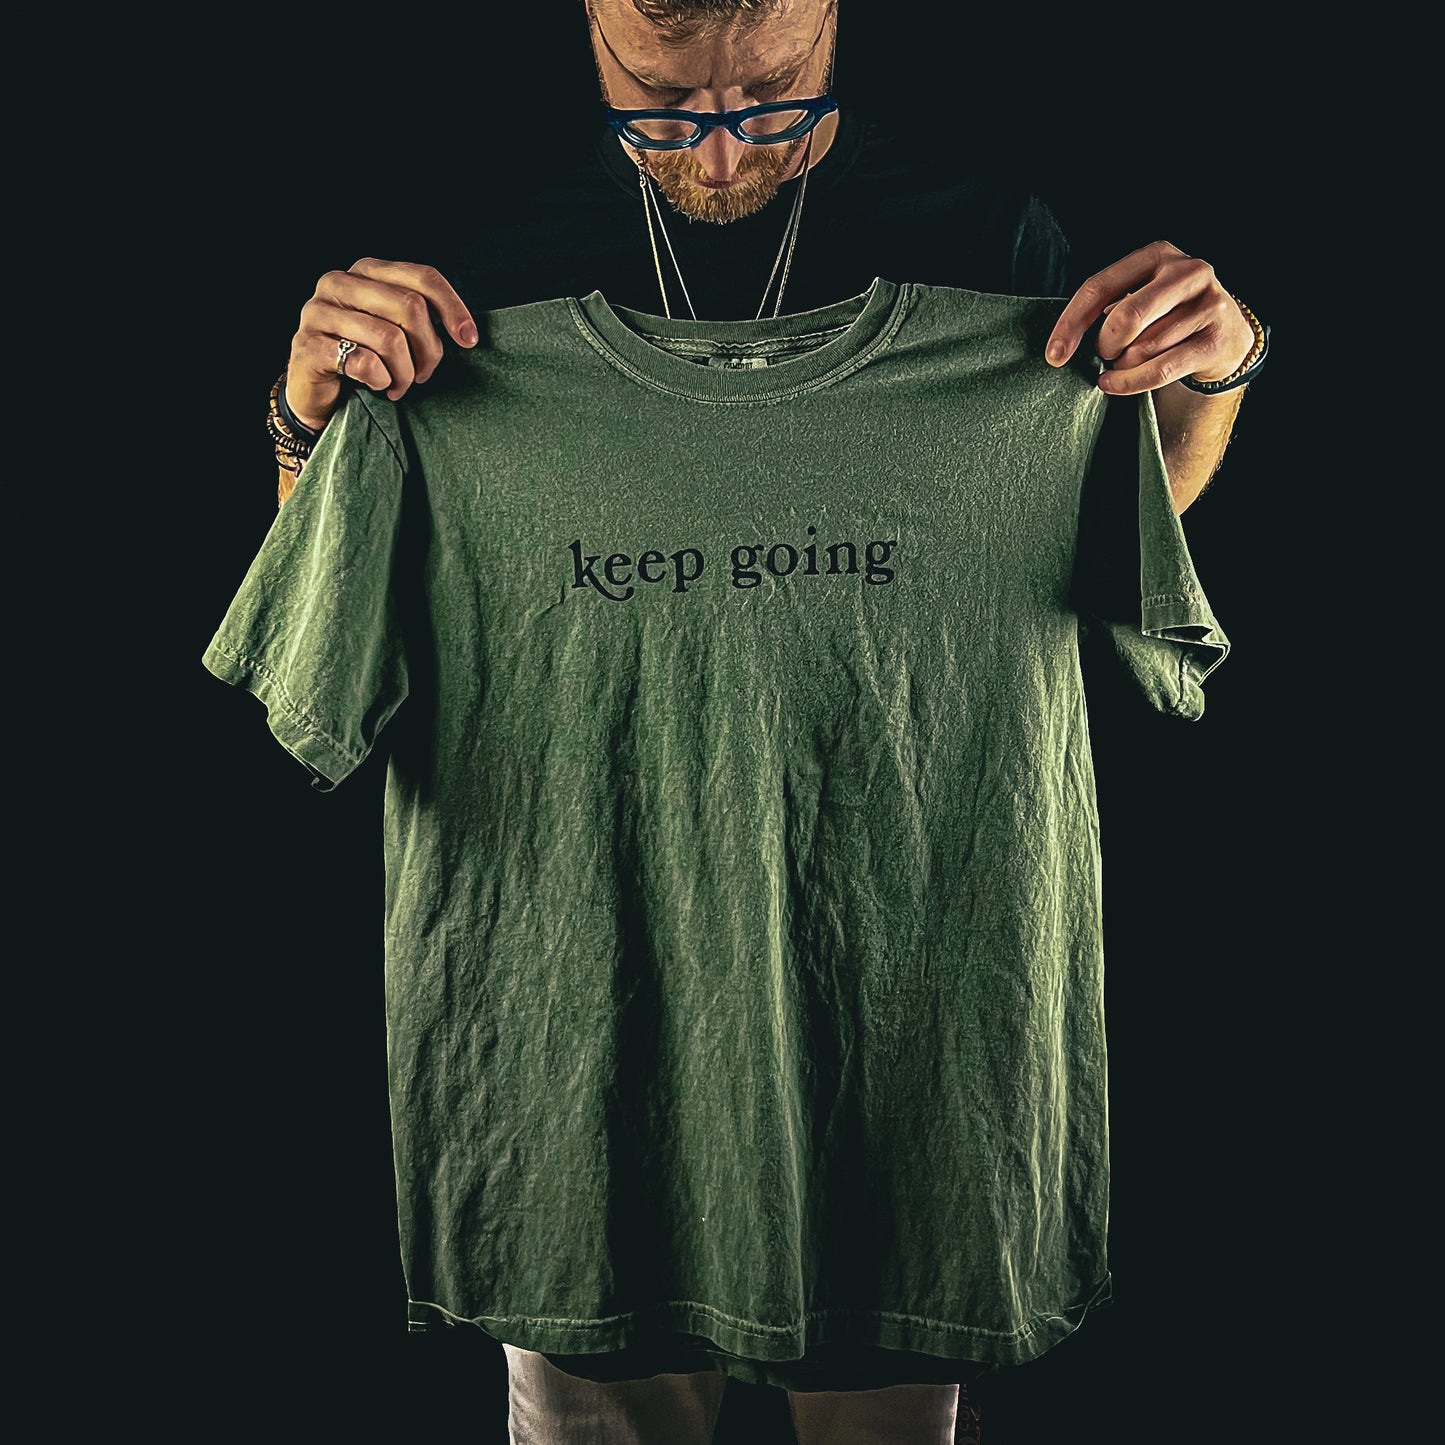 keep going - you are valid - long sleeve